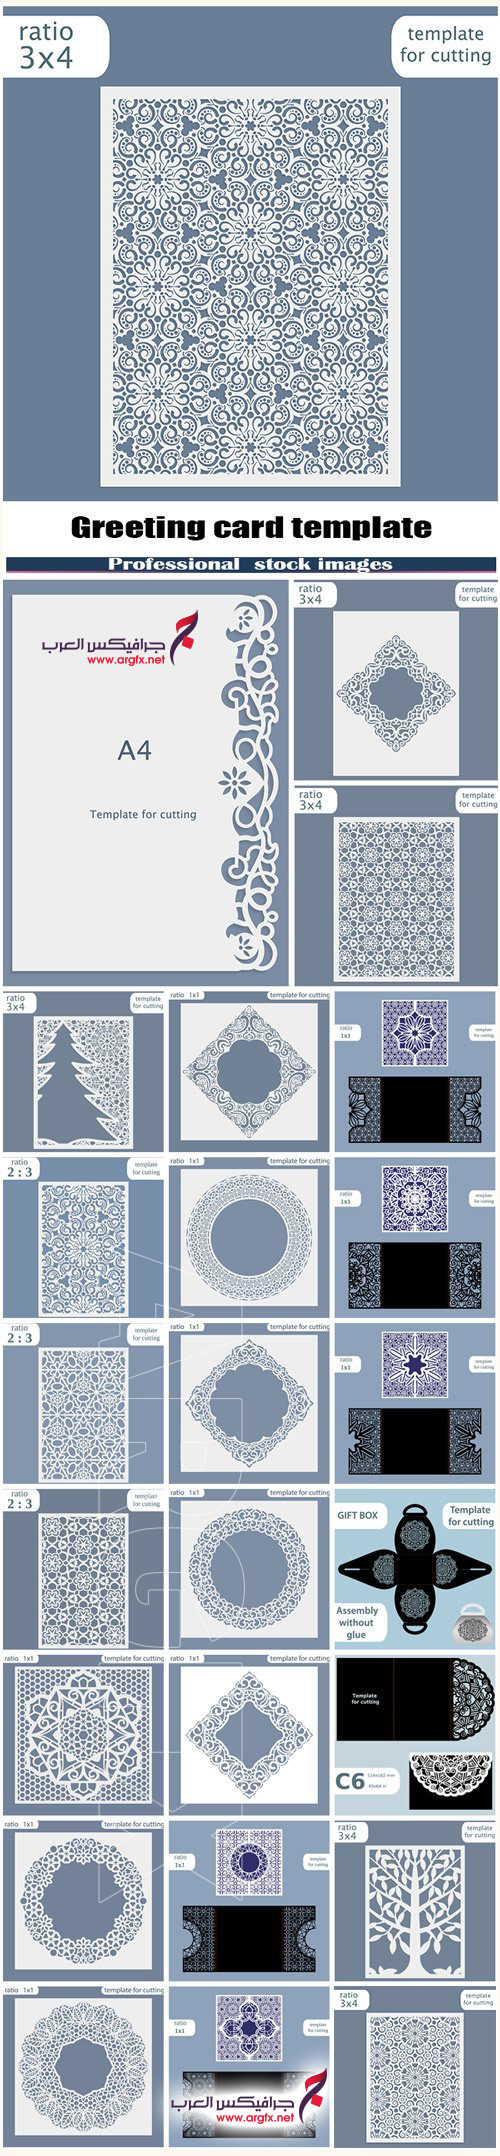 Greeting card template for cutting plotter